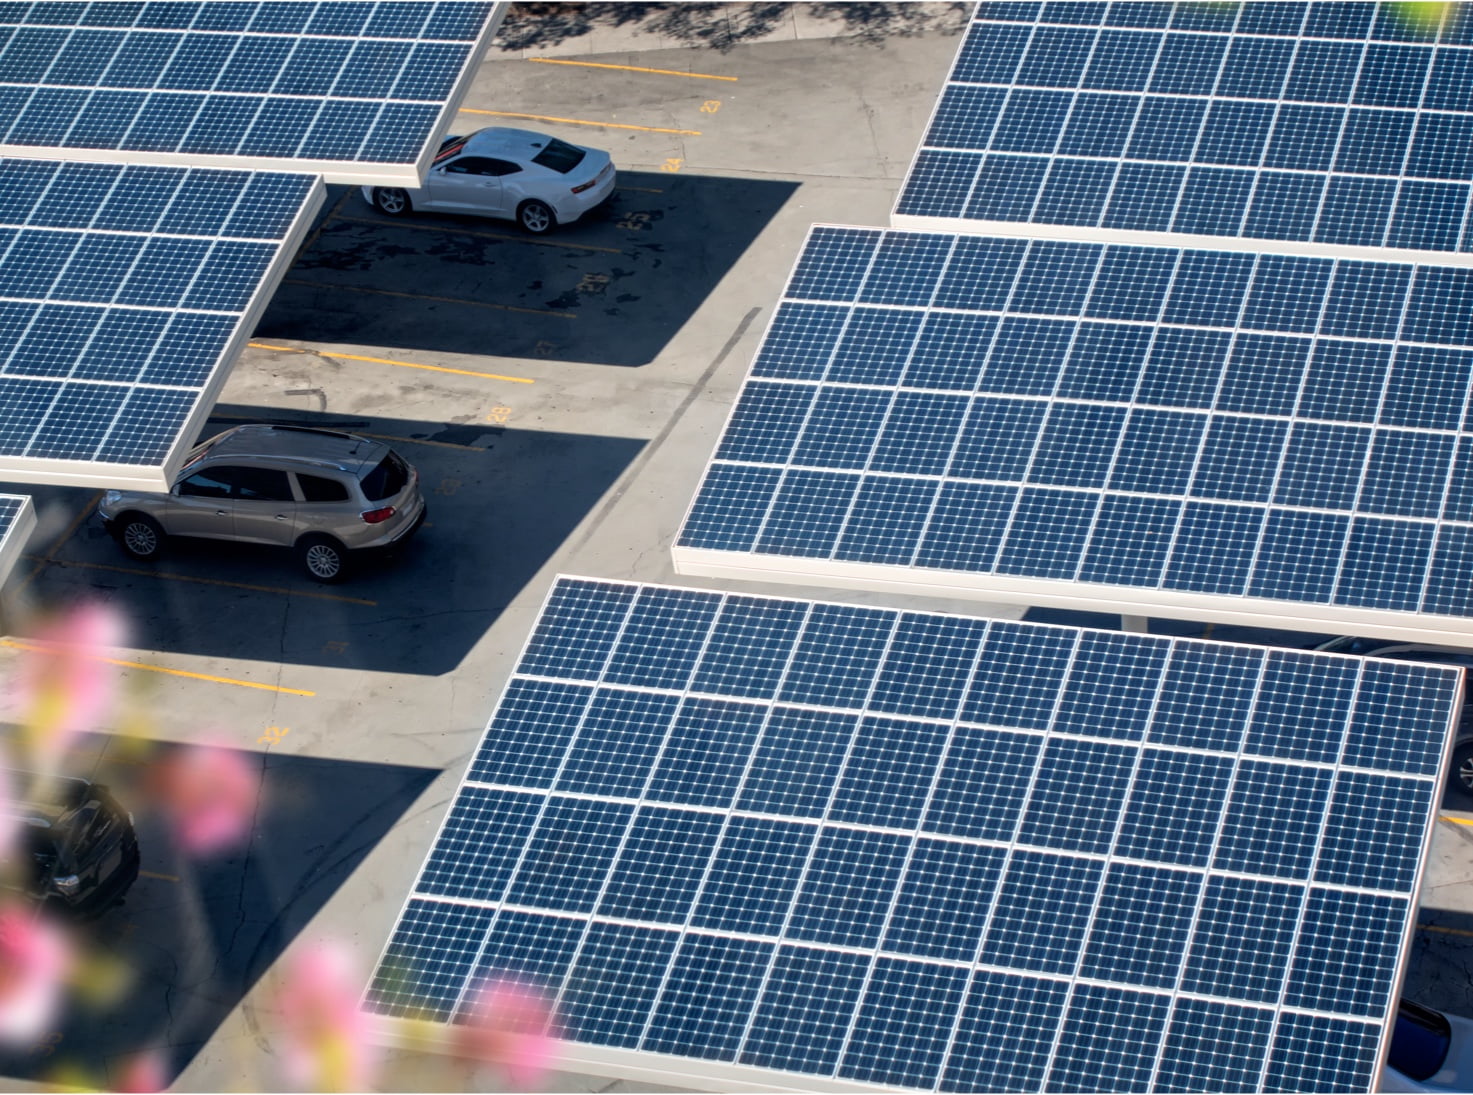 Overview of sunny solar panels covering a parking structure with parked cars